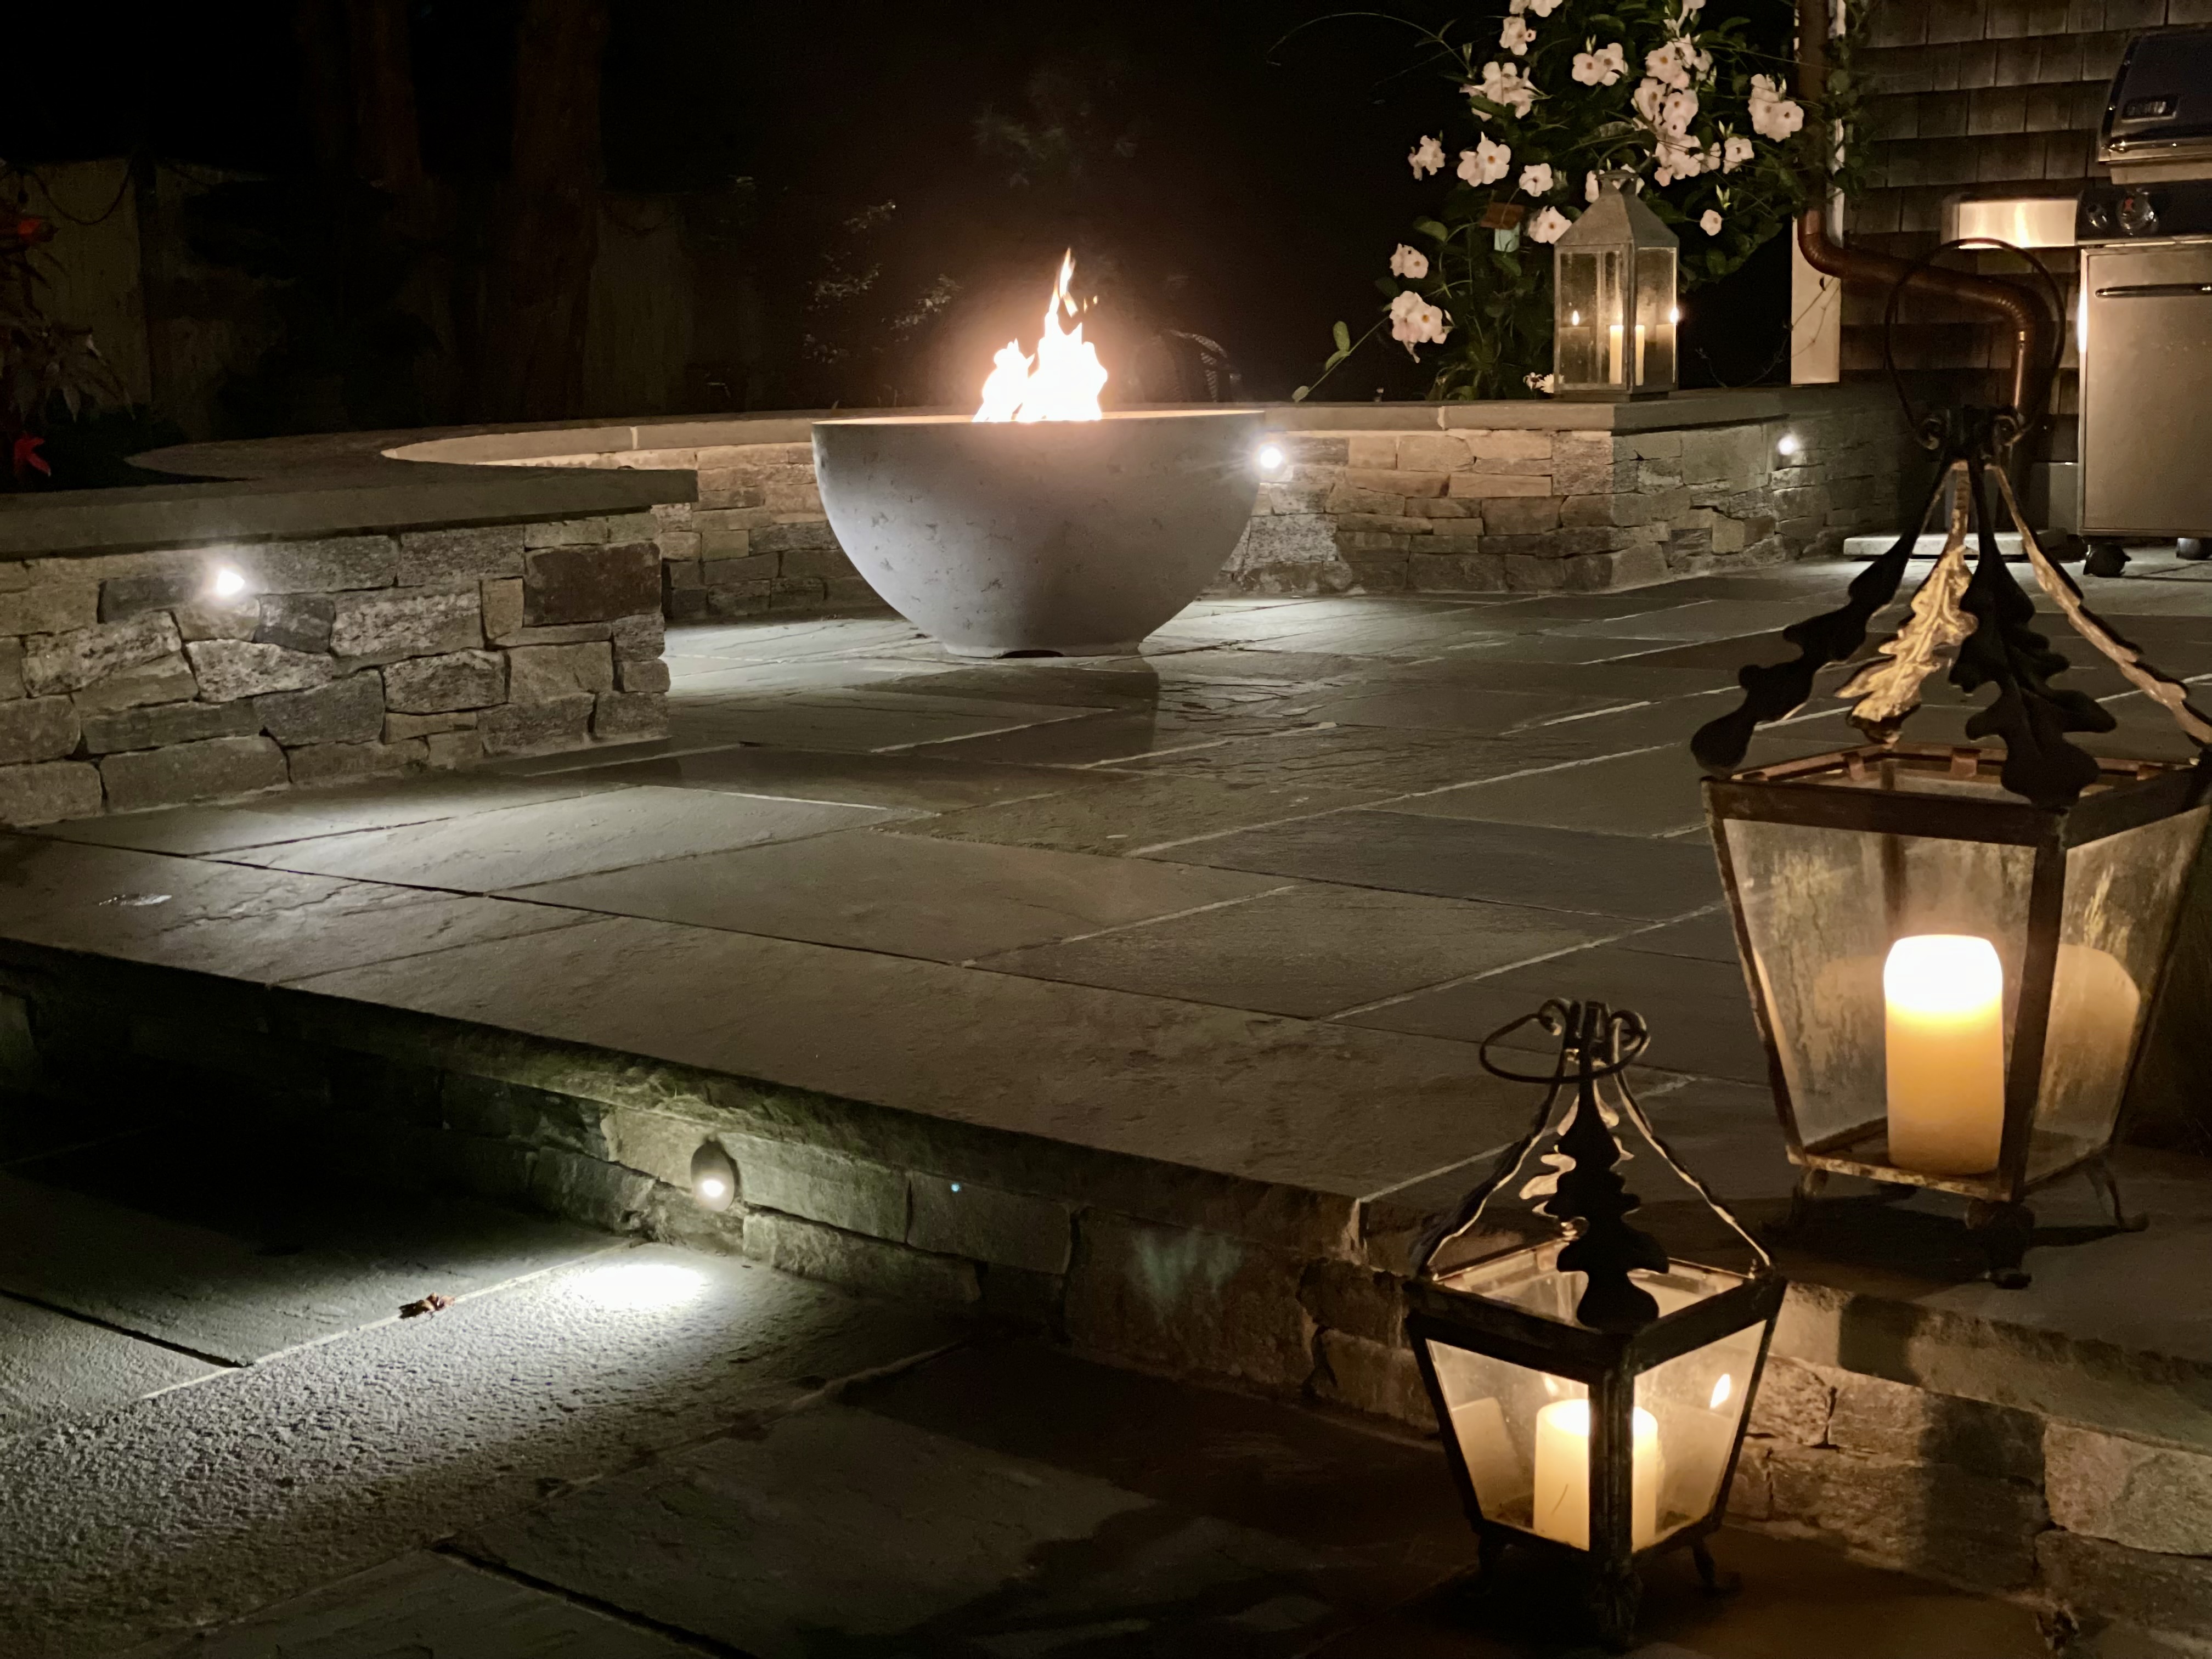 fire bowl at night with lanterns